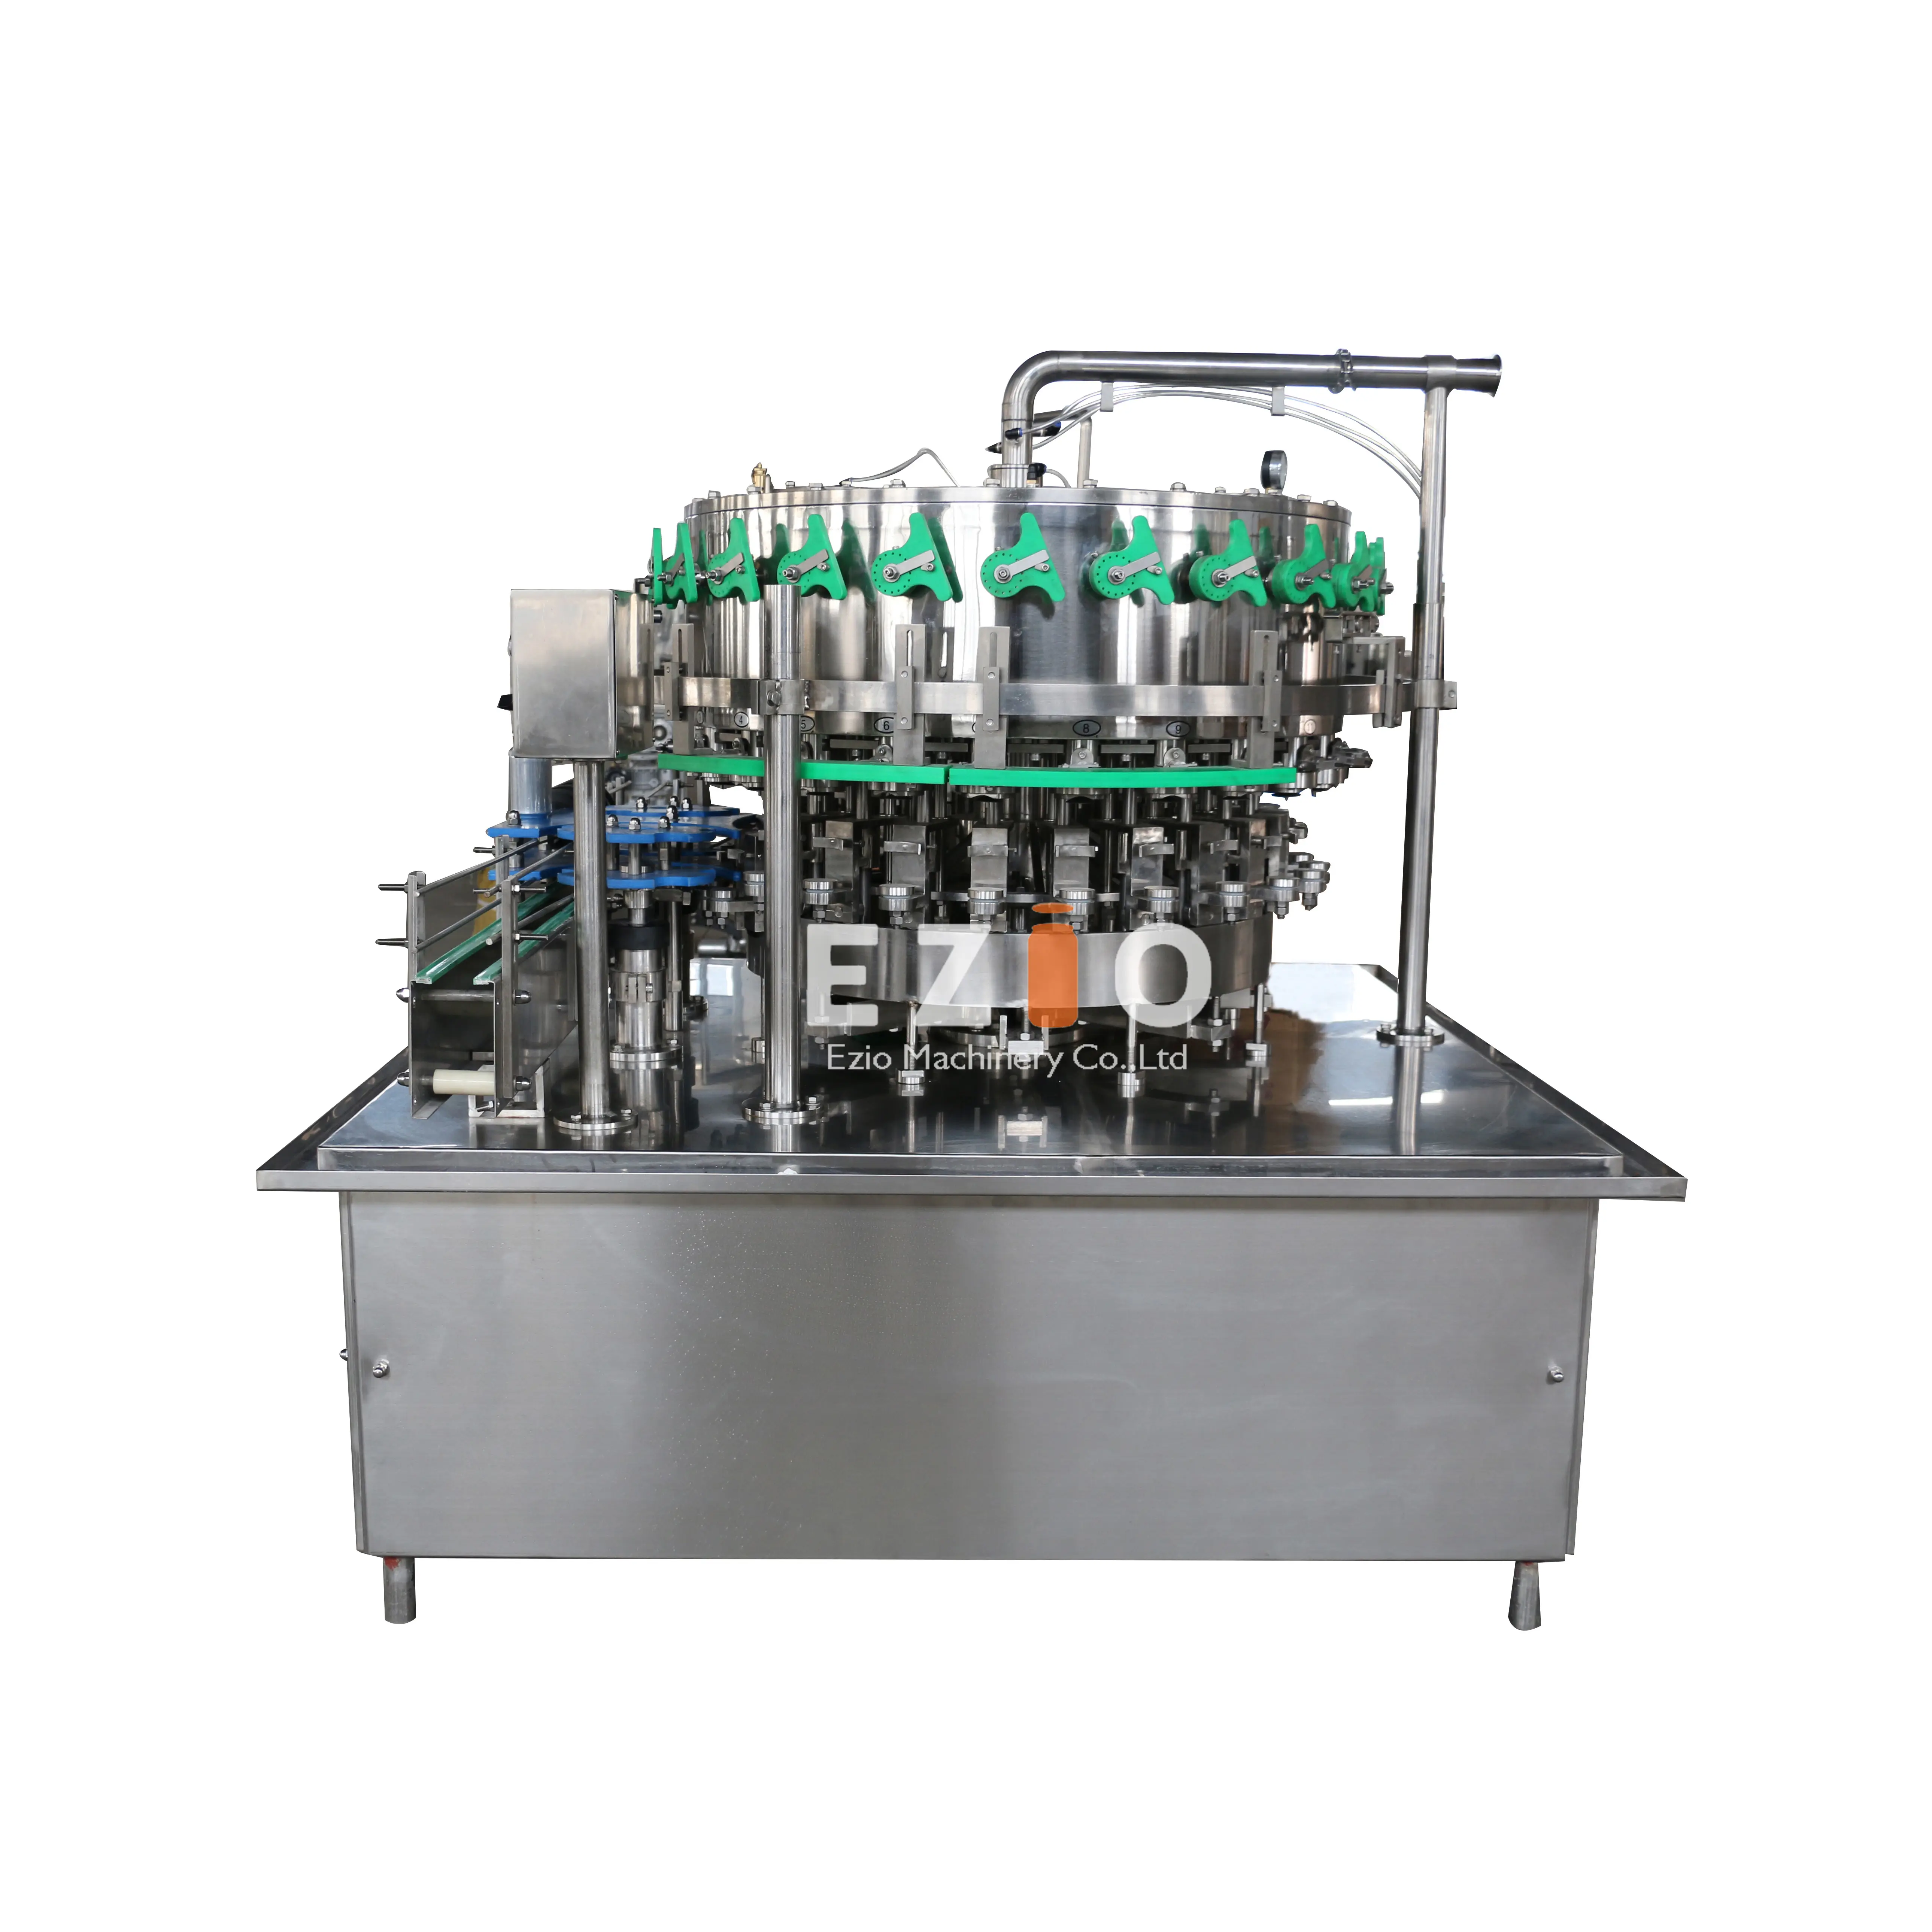 Eziobloc-32-8 High Capacity 12000CPH Automatic Beer Canning Machine Equipment / Beer Can Filling Machine